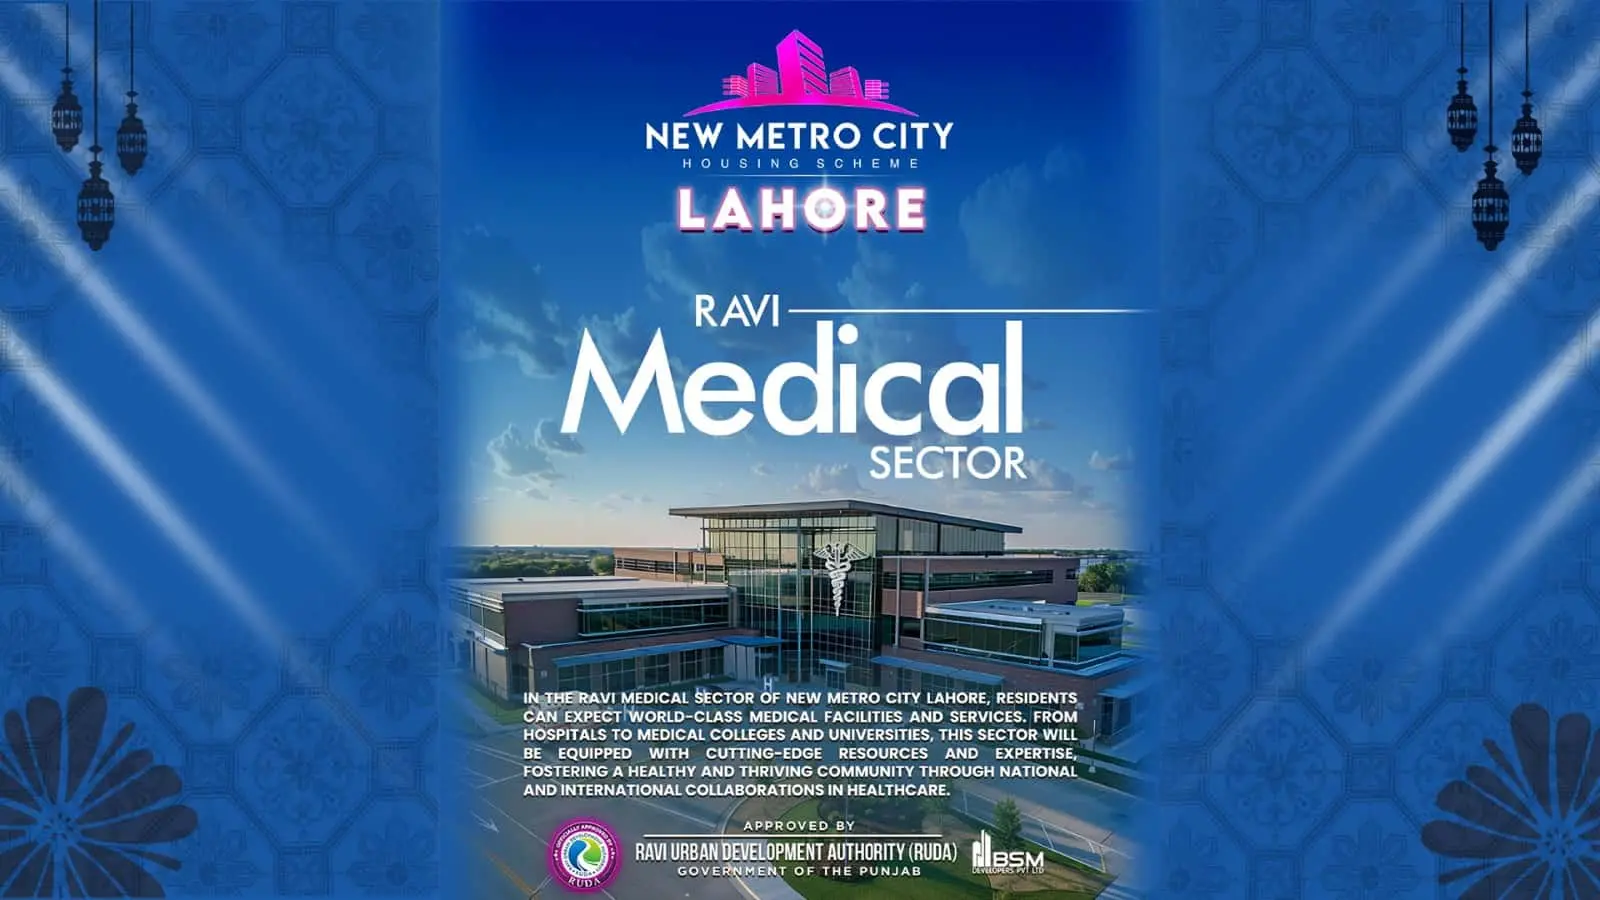 Ravi Medical Sector in New Metro City Lahore